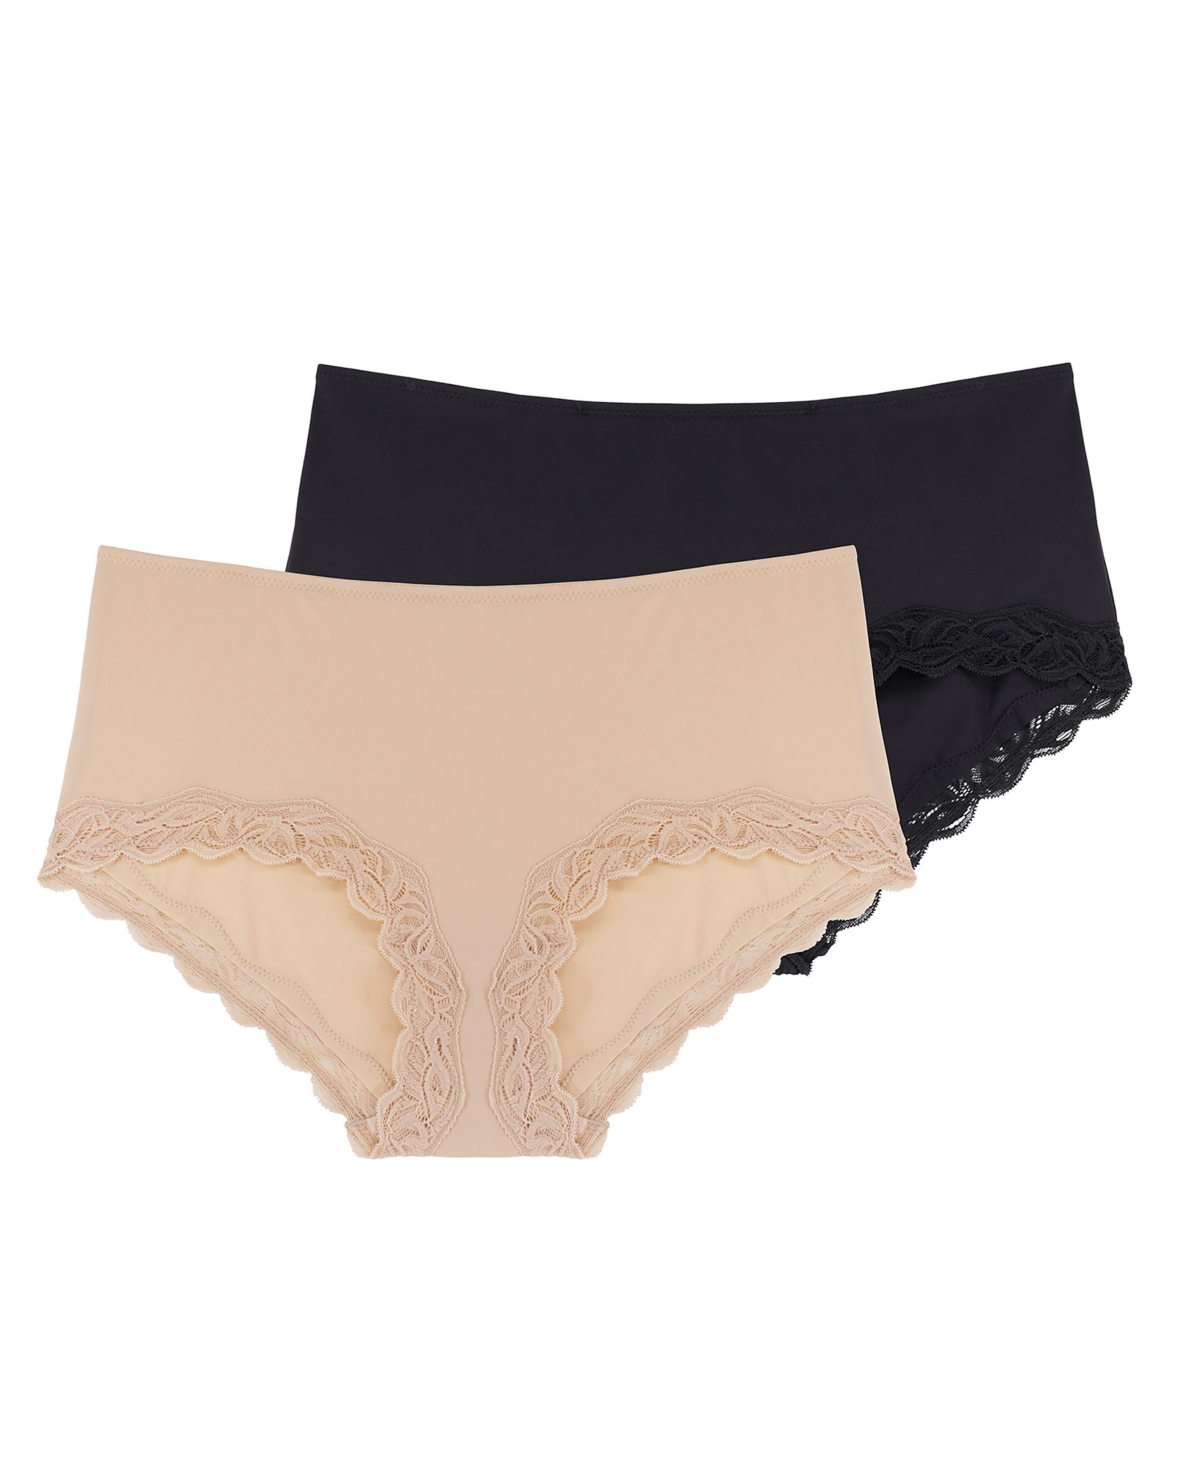 Women's Evie Micro and Lace 2 Pc. High Rise Brief Panties - Nude, Black